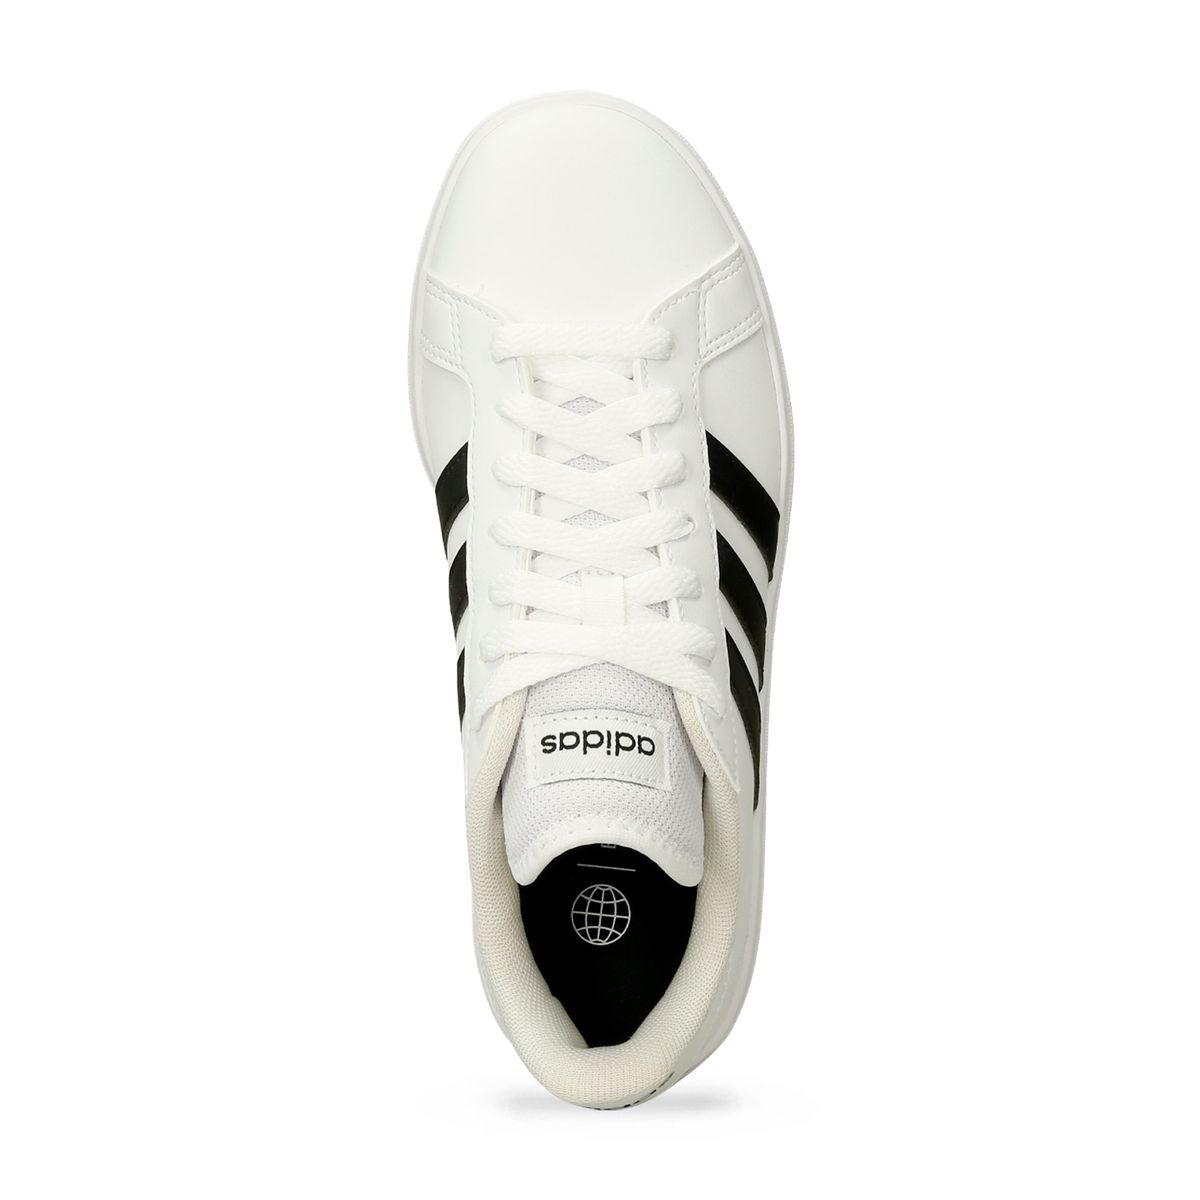 Tenis Casuales Blanco-Negro Adidas Grand Court Base 2. Mujer